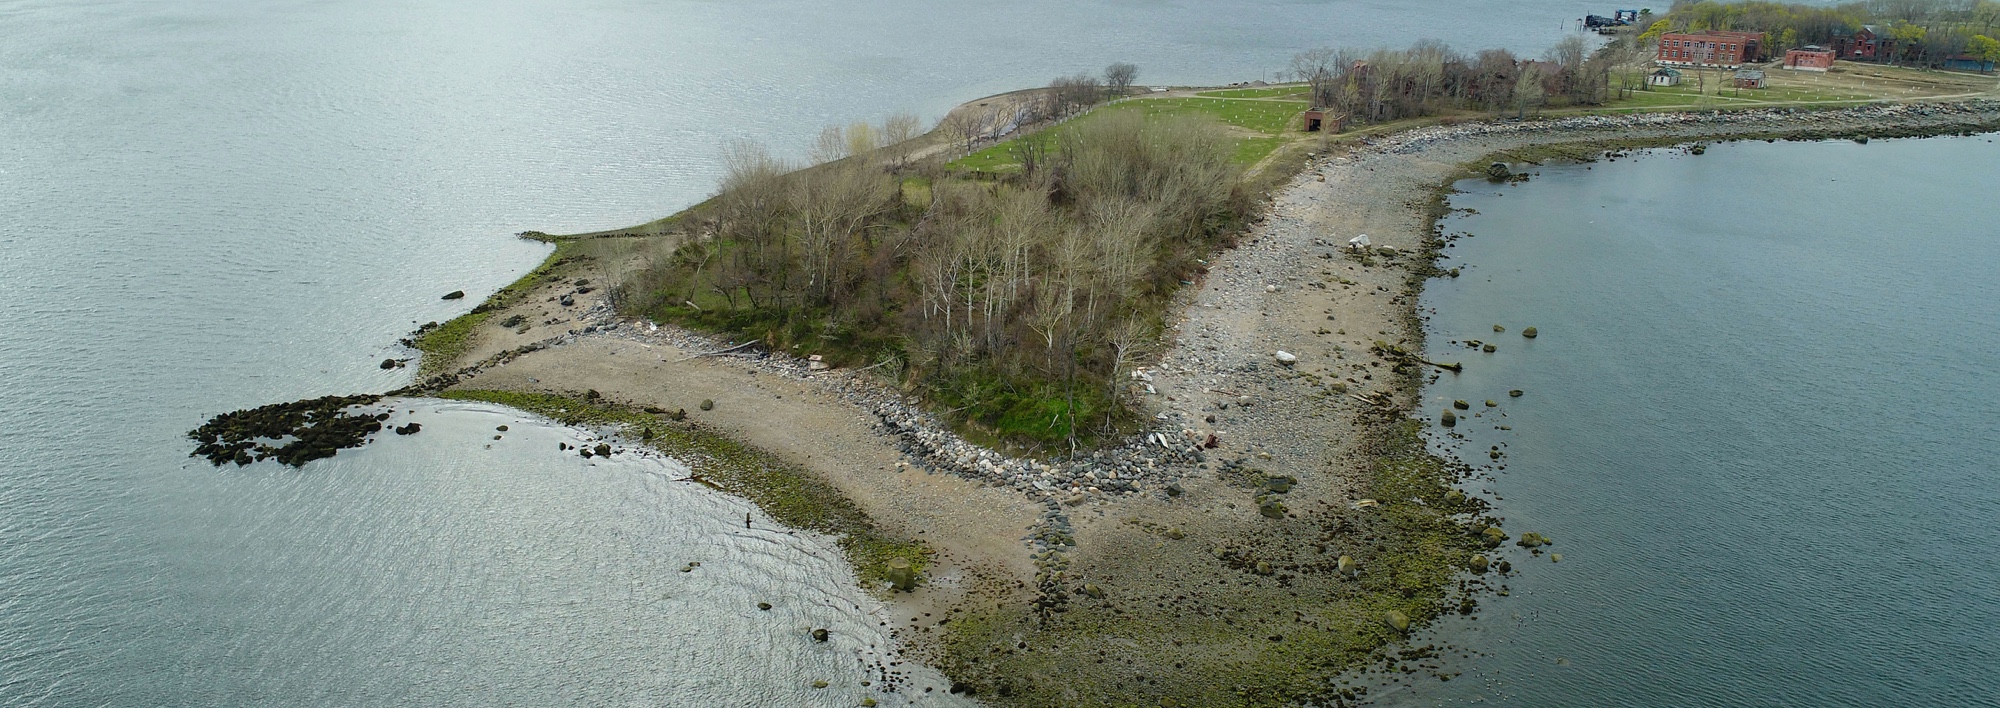 Southern Hart Island location early AIDS burials